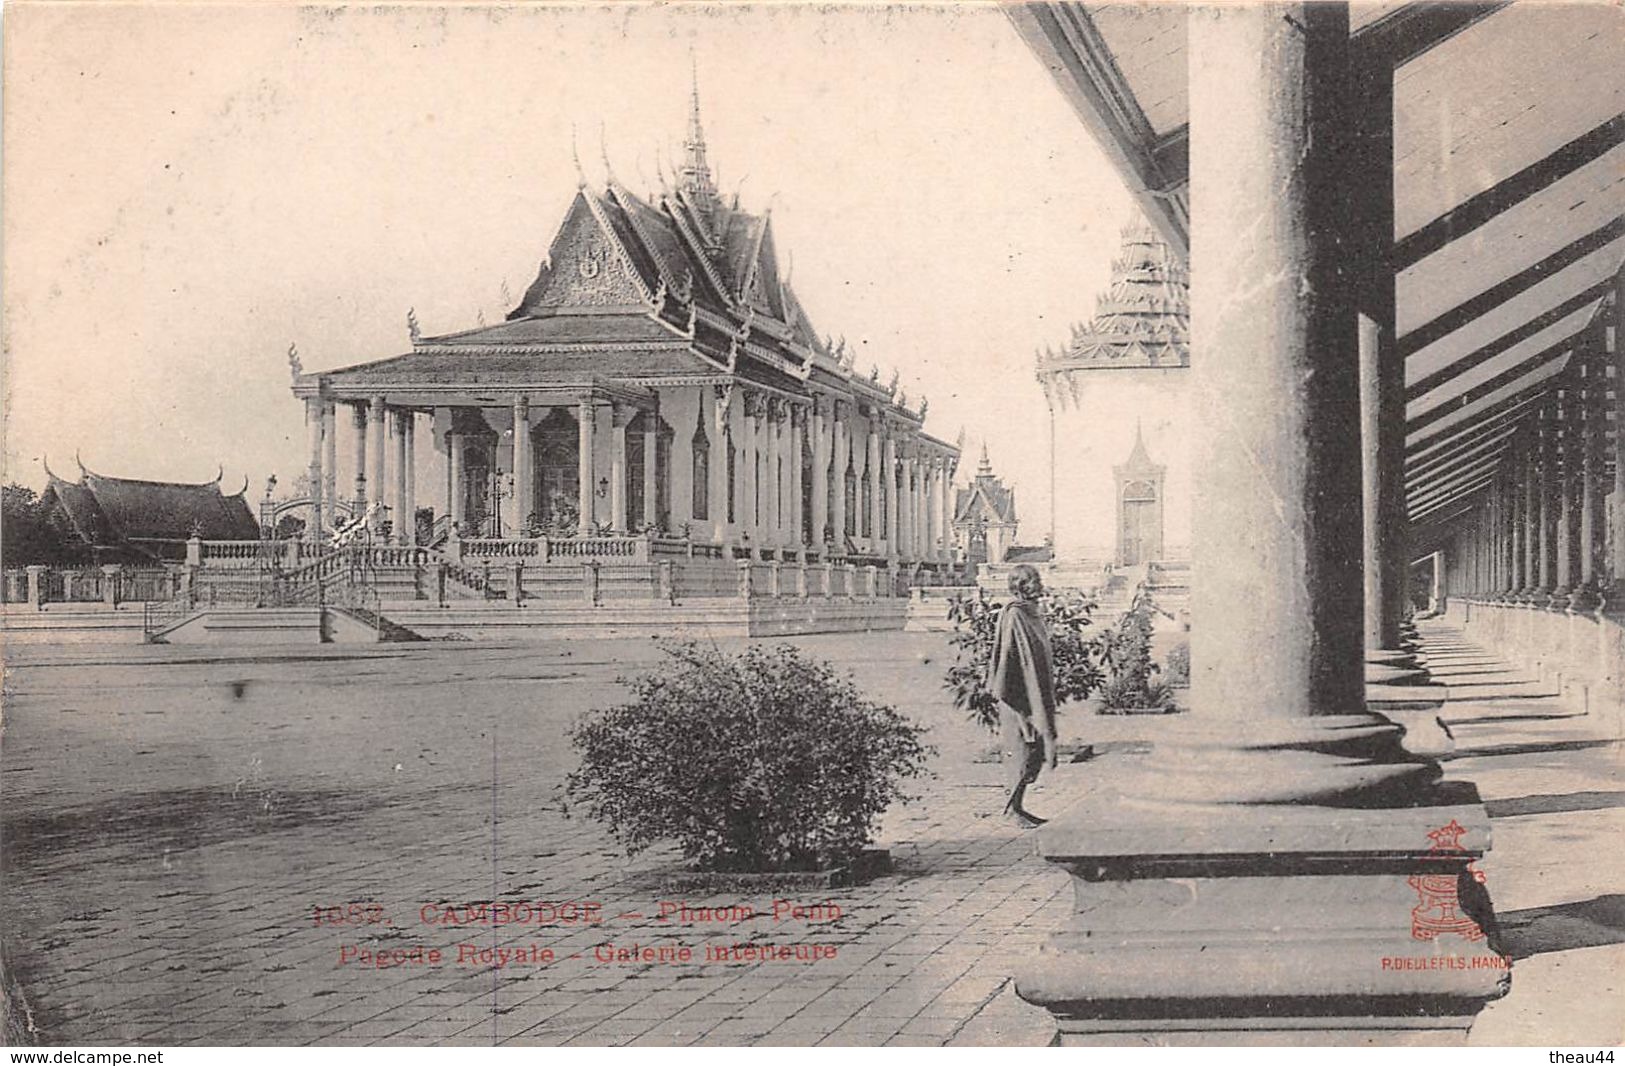 ¤¤  -  CAMBODGE   -  PHNOM-PENH  -  Pagode Royale  -  Galerie Intérieure     -  ¤¤ - Kambodscha